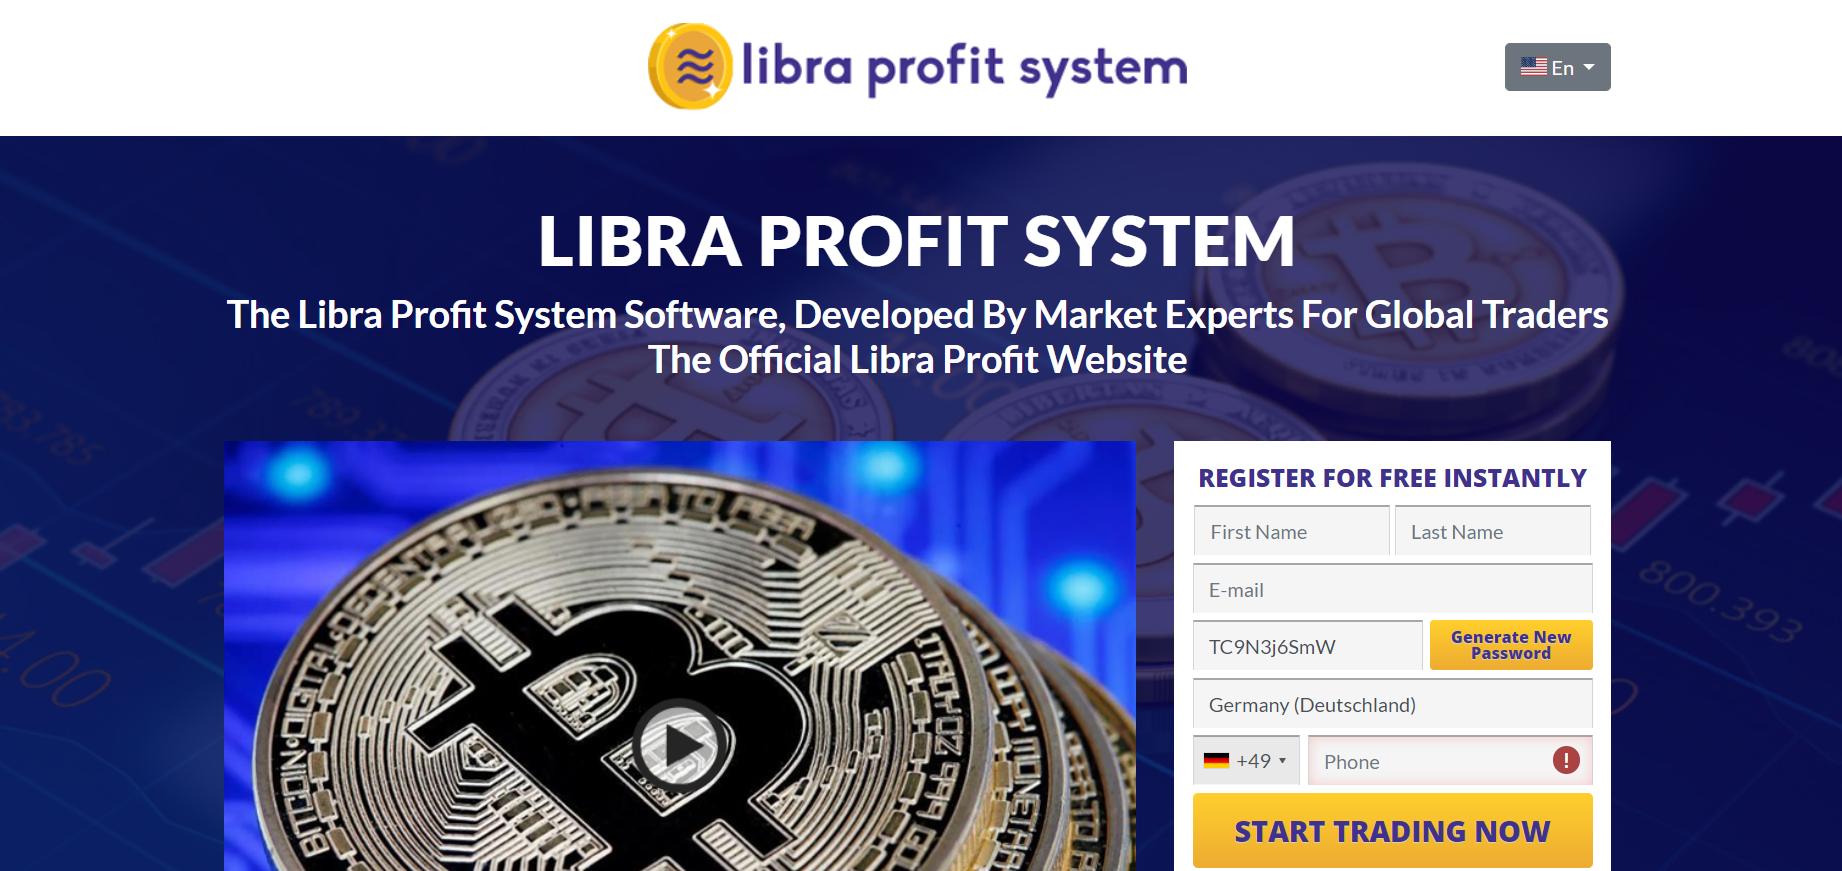 the official website of Libra Profit System